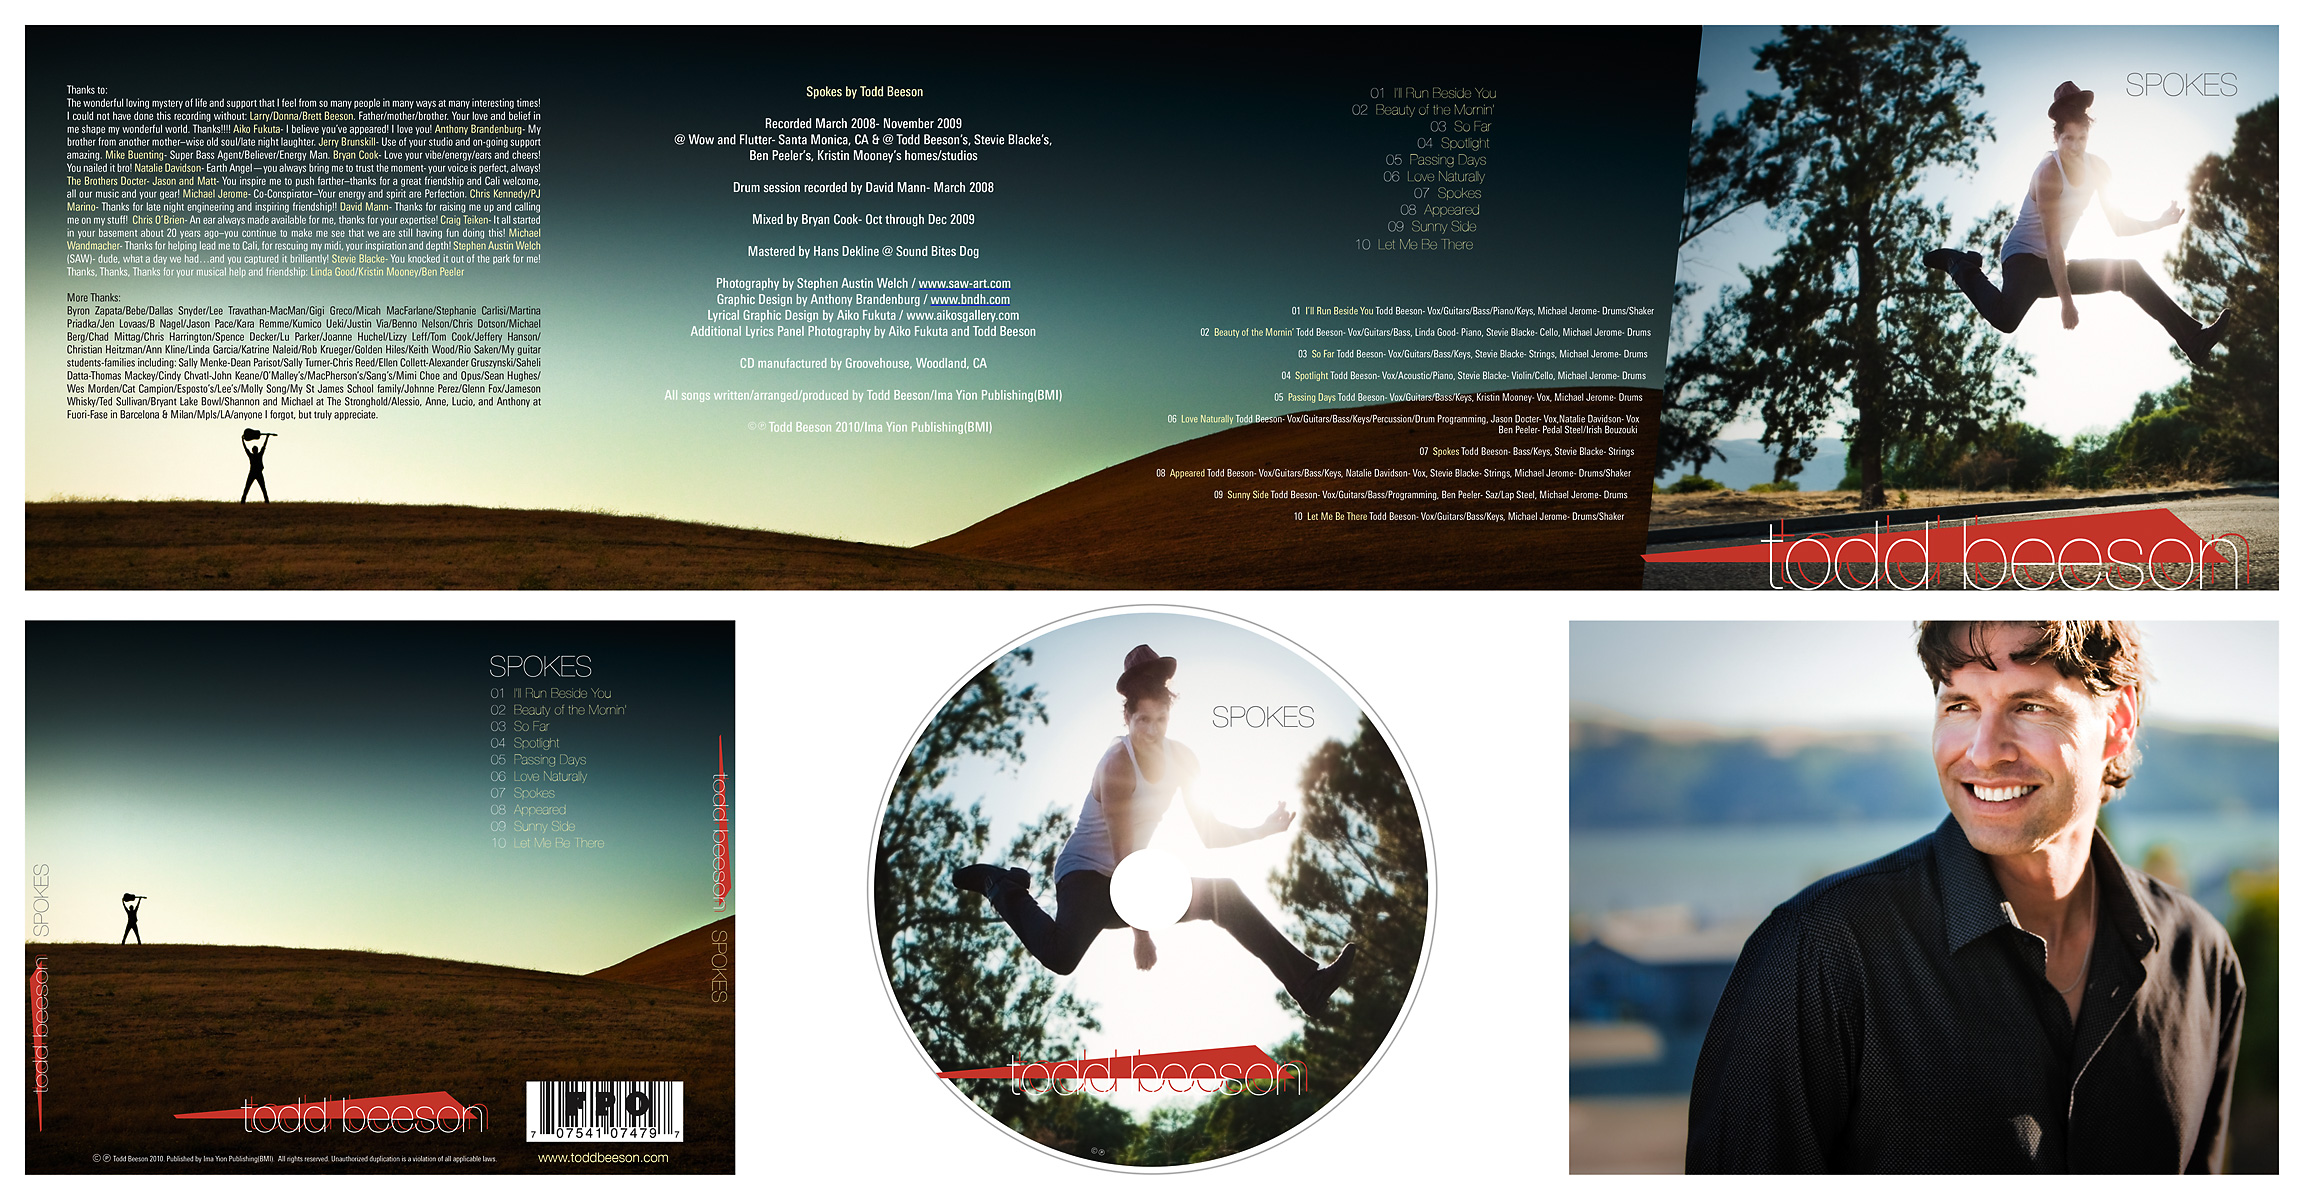 cd-layout-great_crusades-todd_beeson-spokes-border-stephen-austin-welch-director-photographer